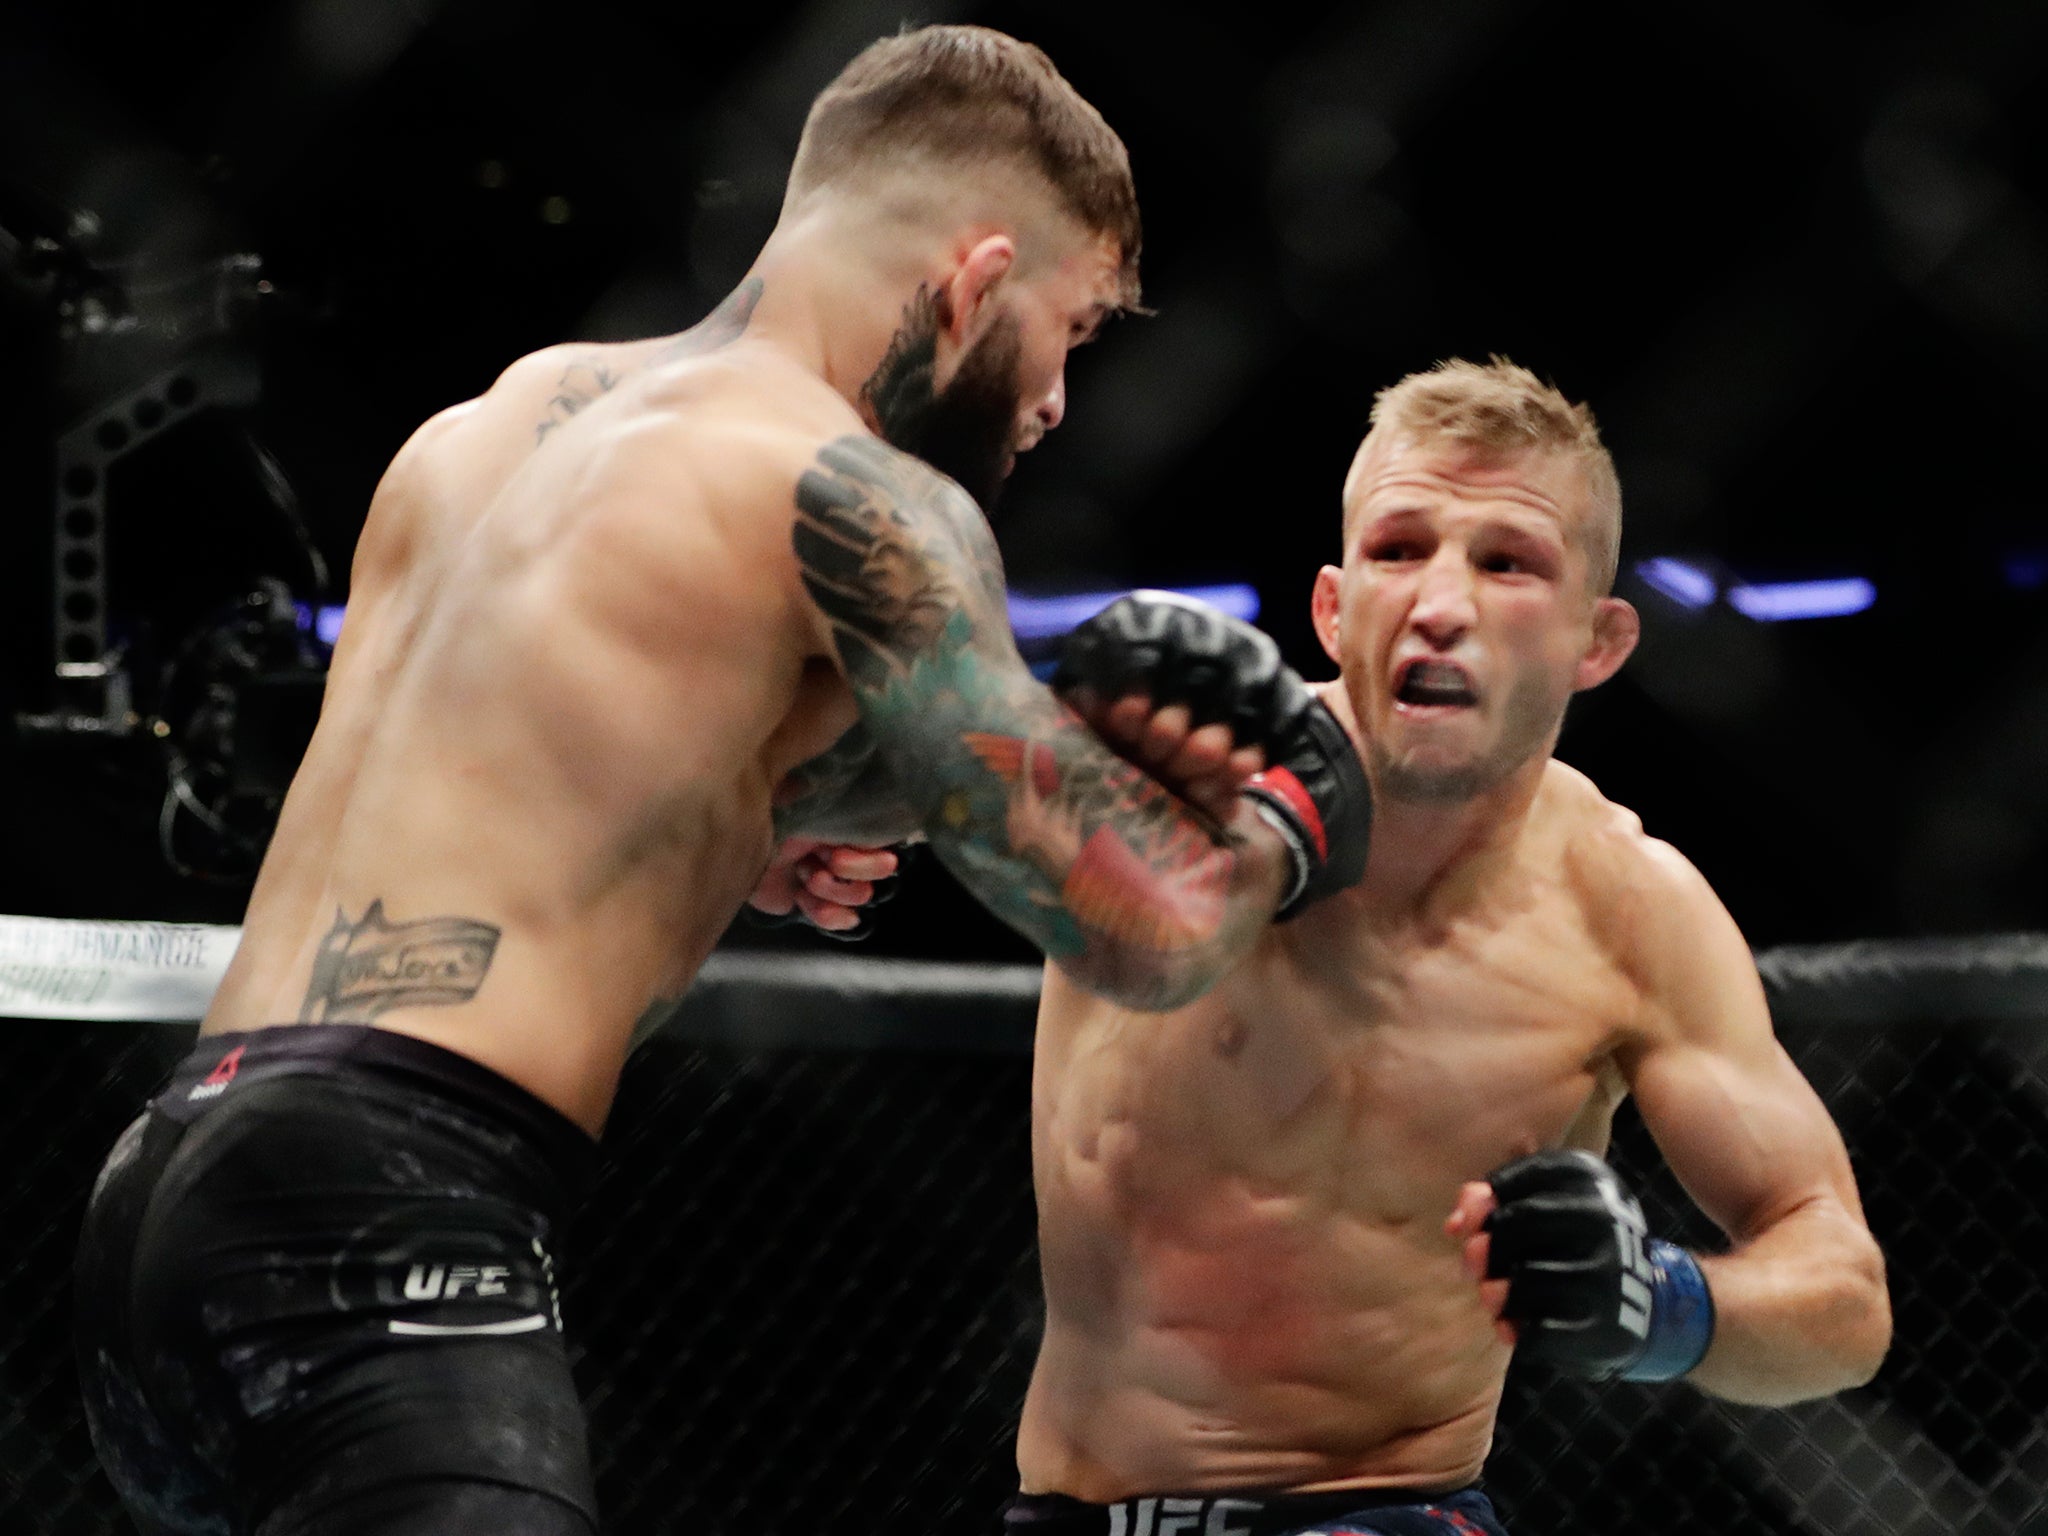 Cody Garbrandt was stopped by rival TJ Dillashaw